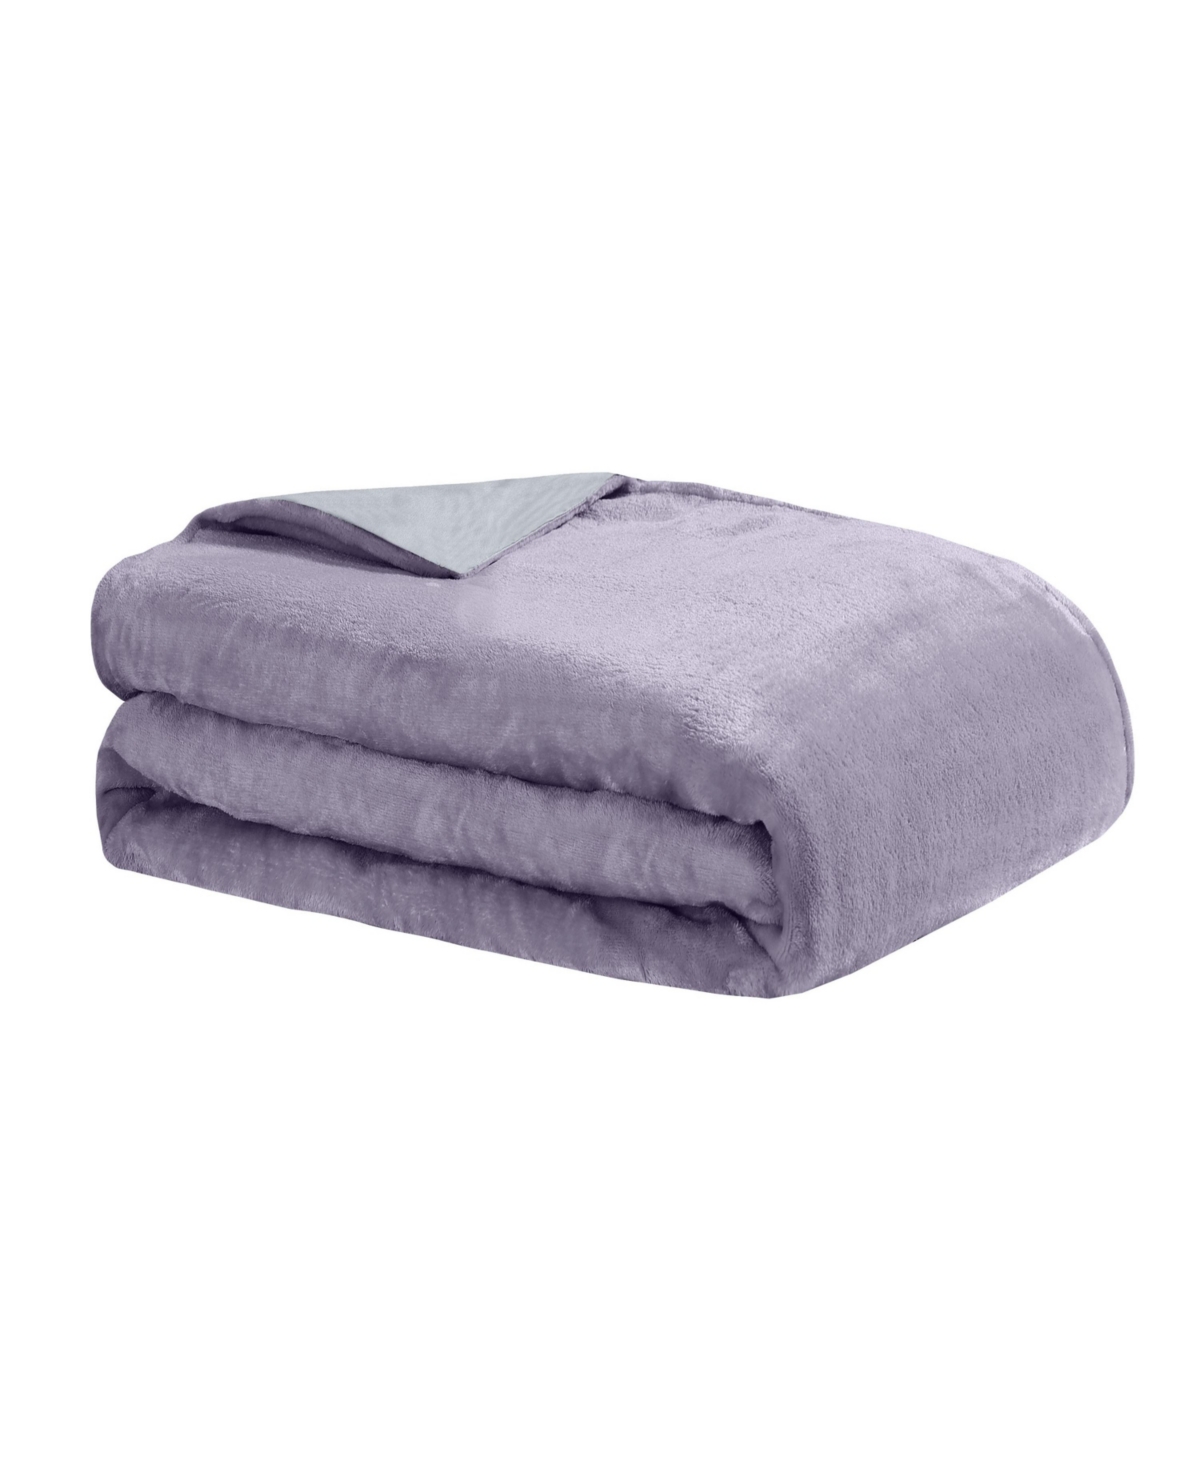 Dreamlab Crystal Reversible Cooling Blanket With Removable Cover, 48" X 72" Bedding In Lavender